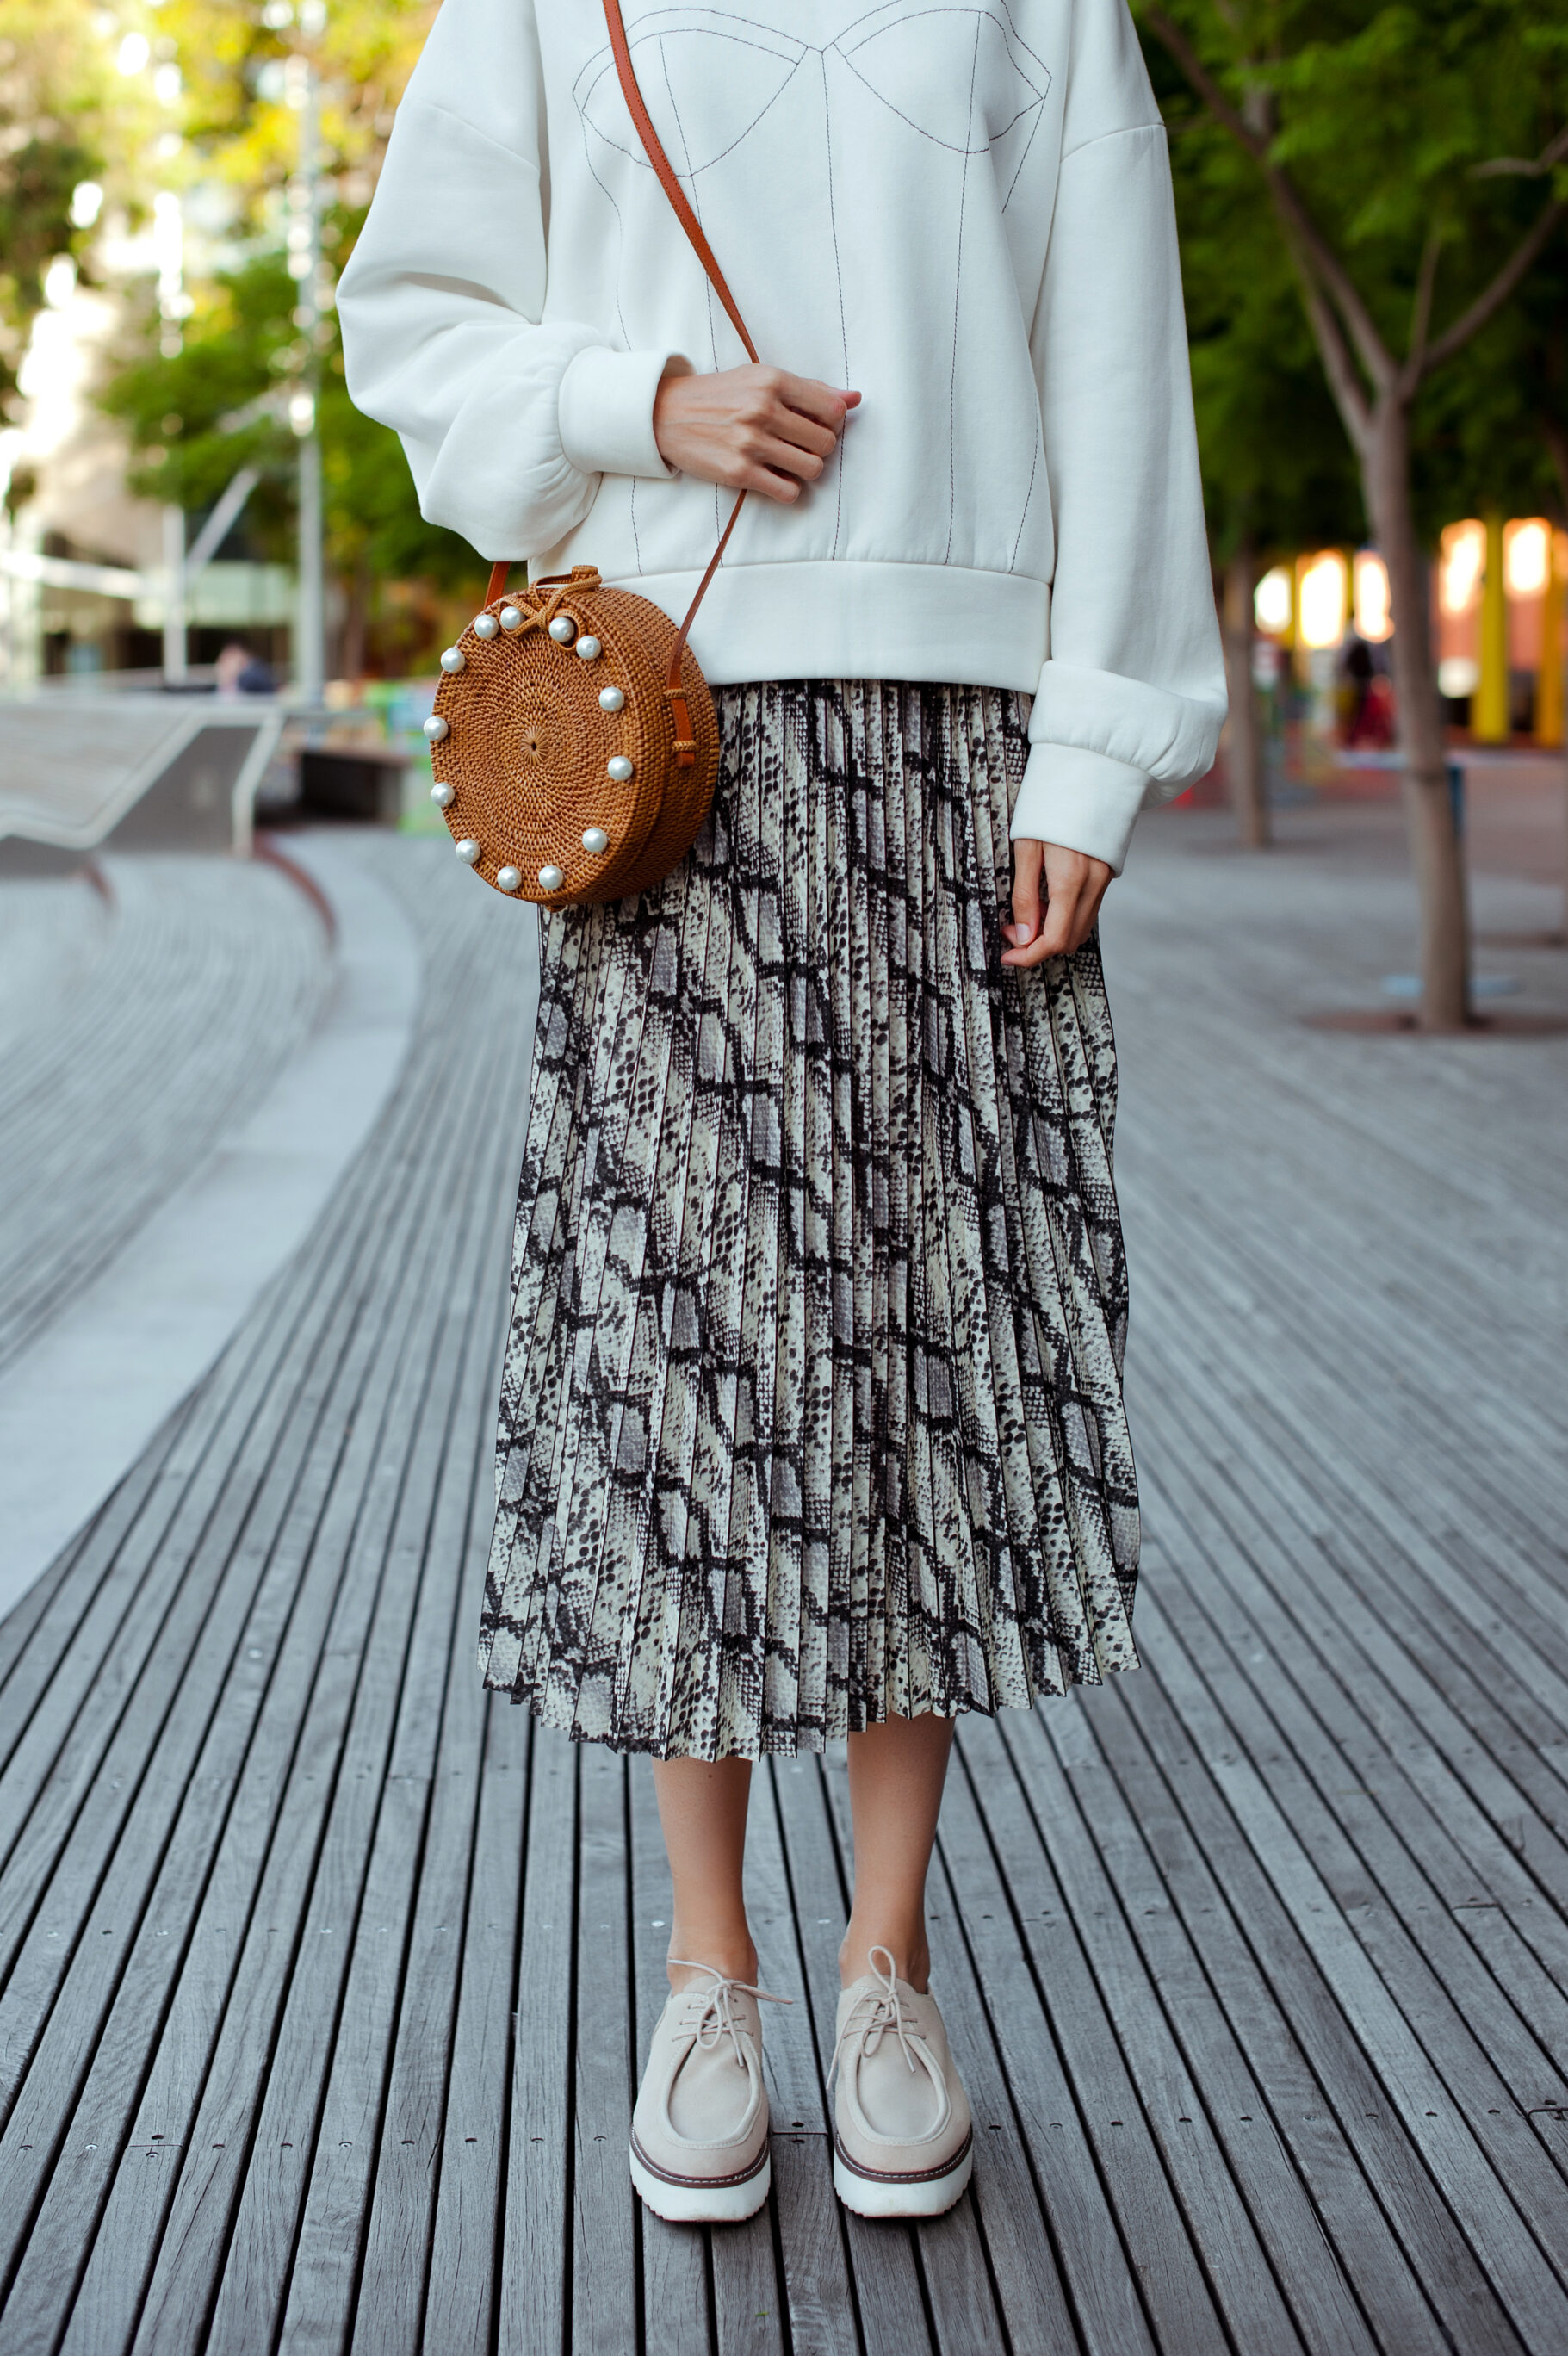 Midi Skirt With Platform Ankle Boots